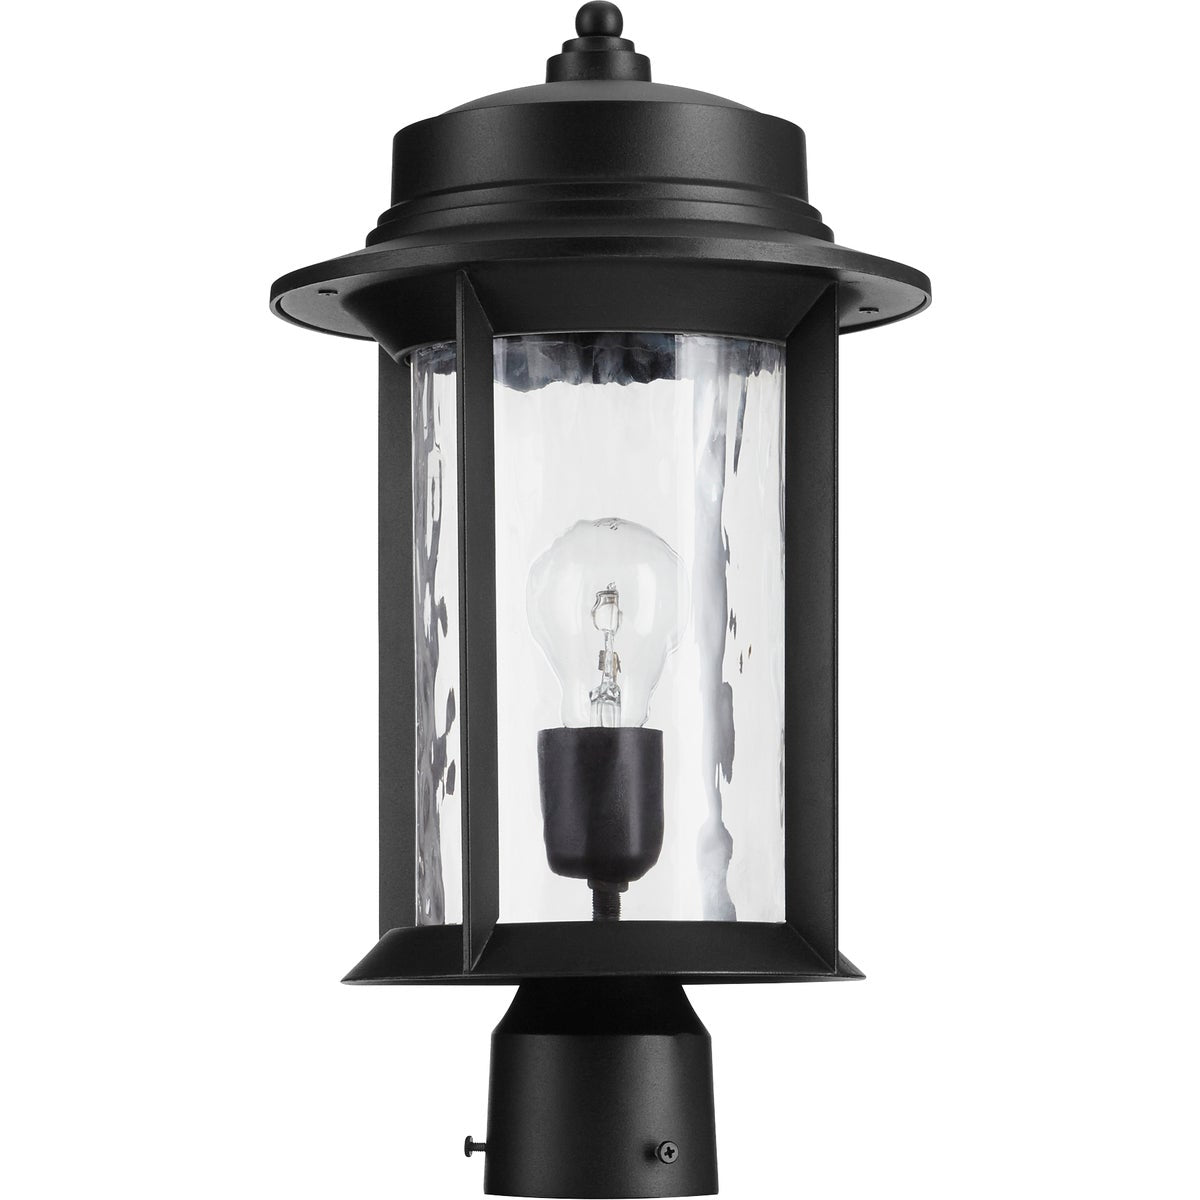 A black mid century modern outdoor post light with clear glass panels, perfect for illuminating your home's exterior. Made from durable metal, this fixture features a clean-lined drum silhouette and hammered glass panes for added embellishment. Fits a single dimmable 100W bulb (not included).